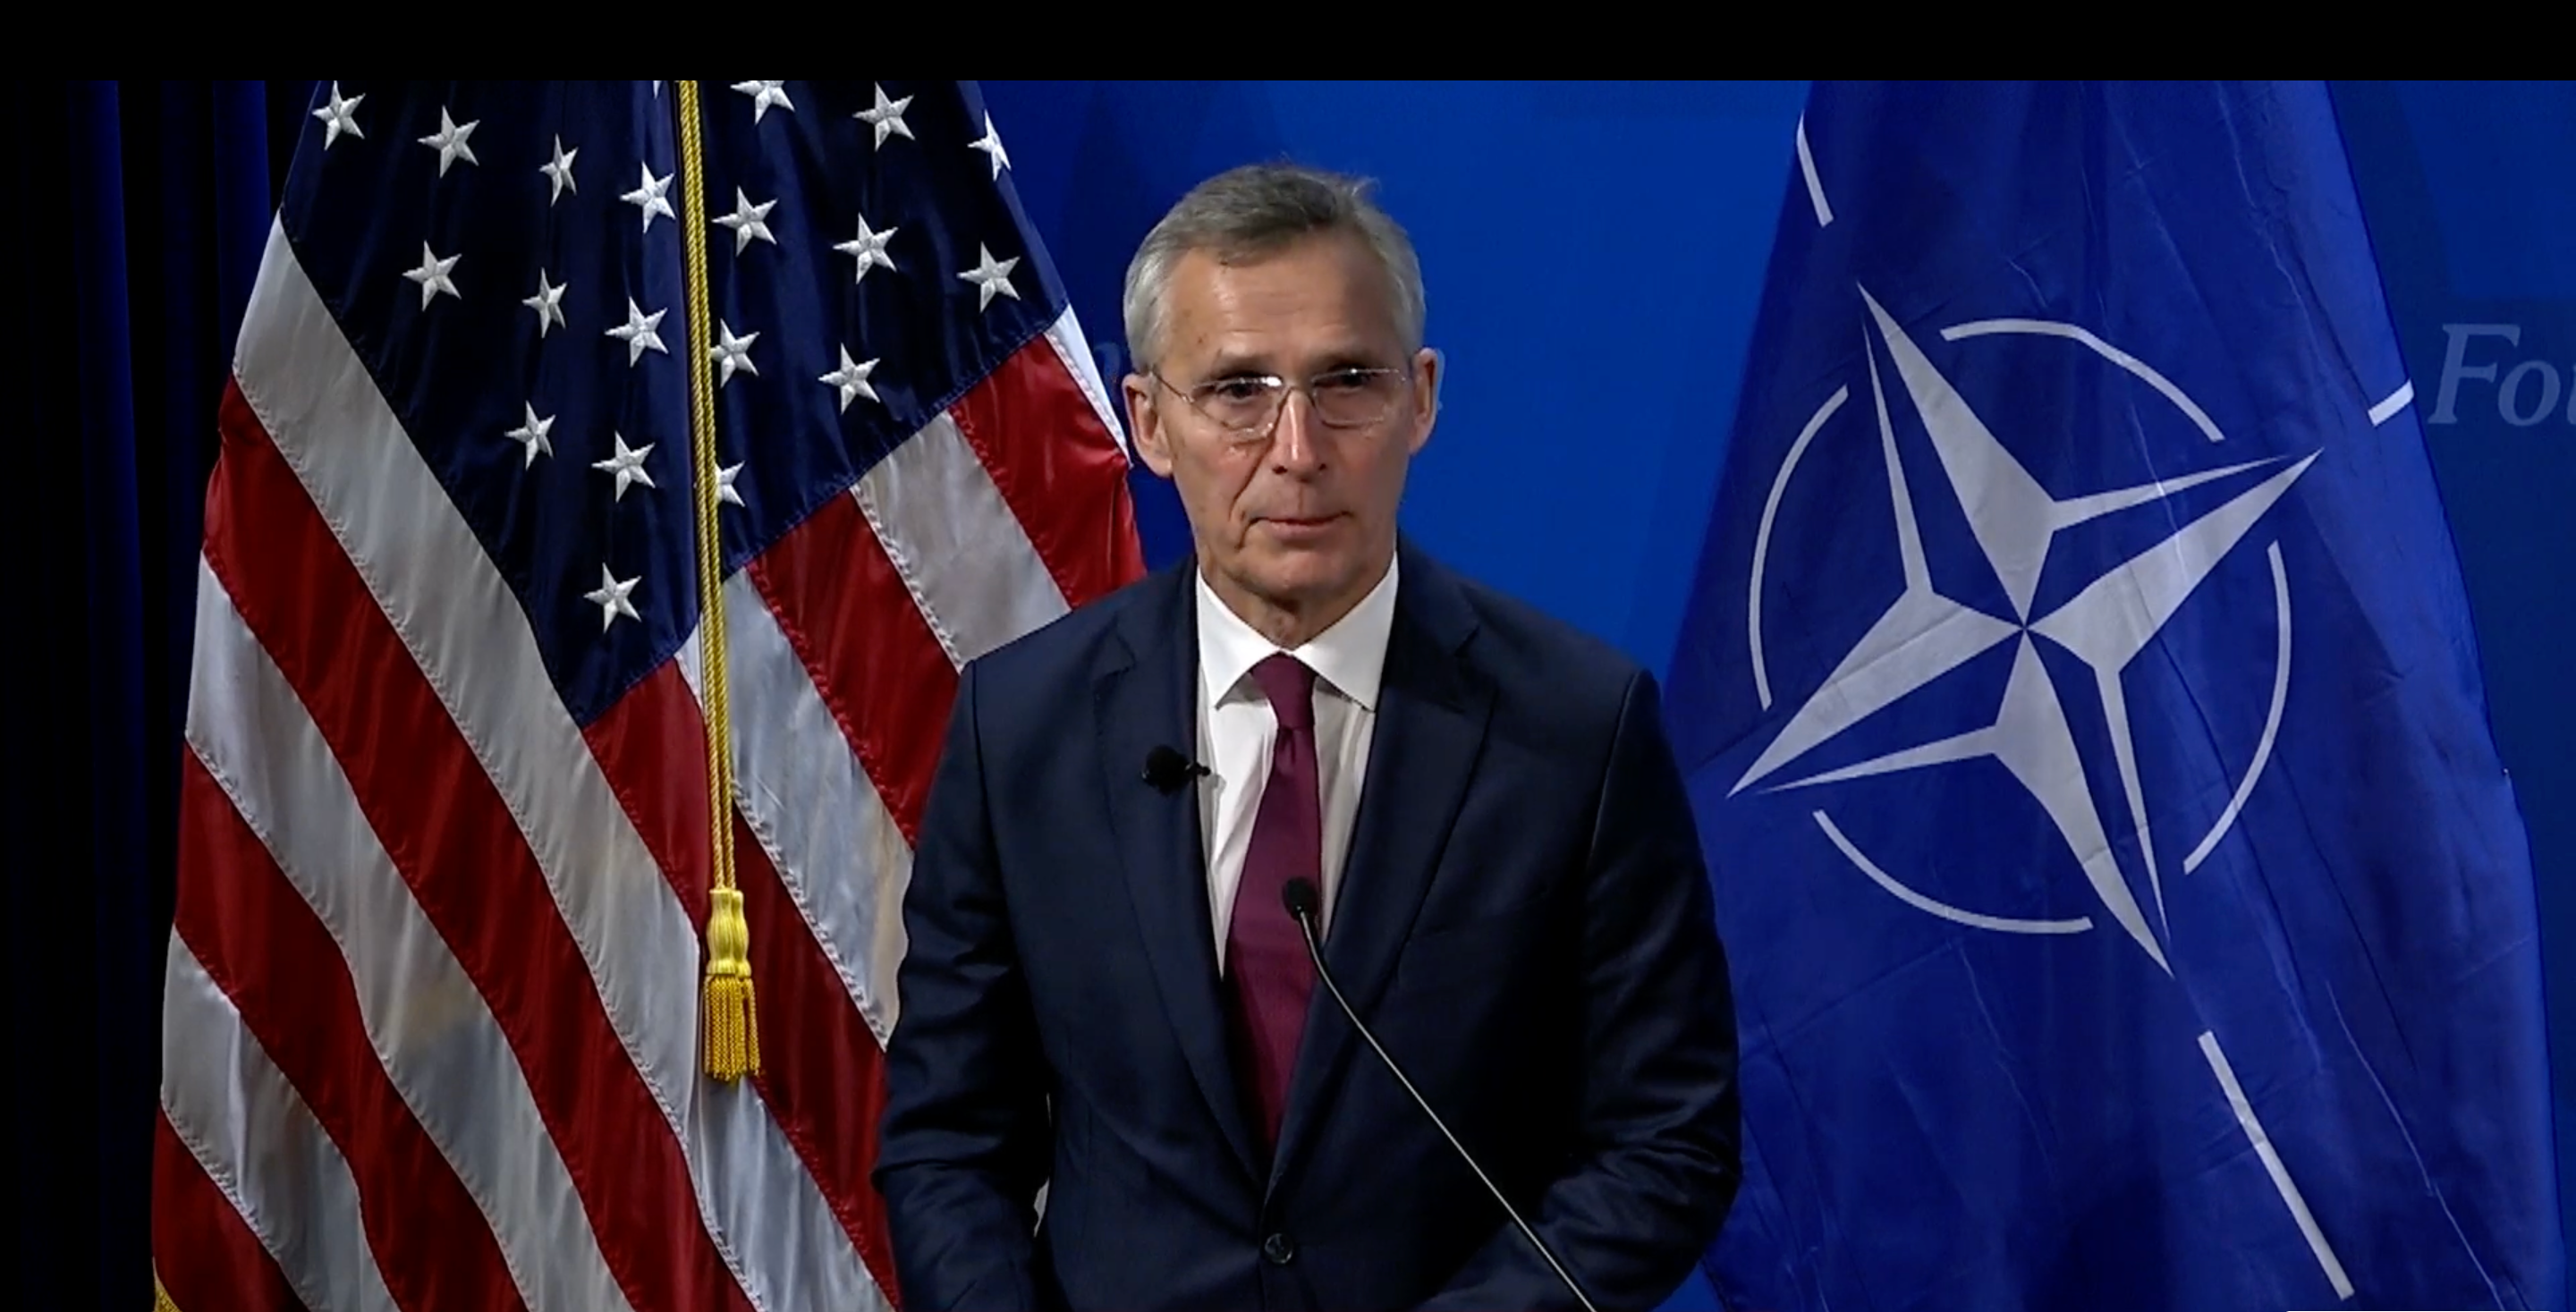 NATO chief in DC trying to get blood from a stone